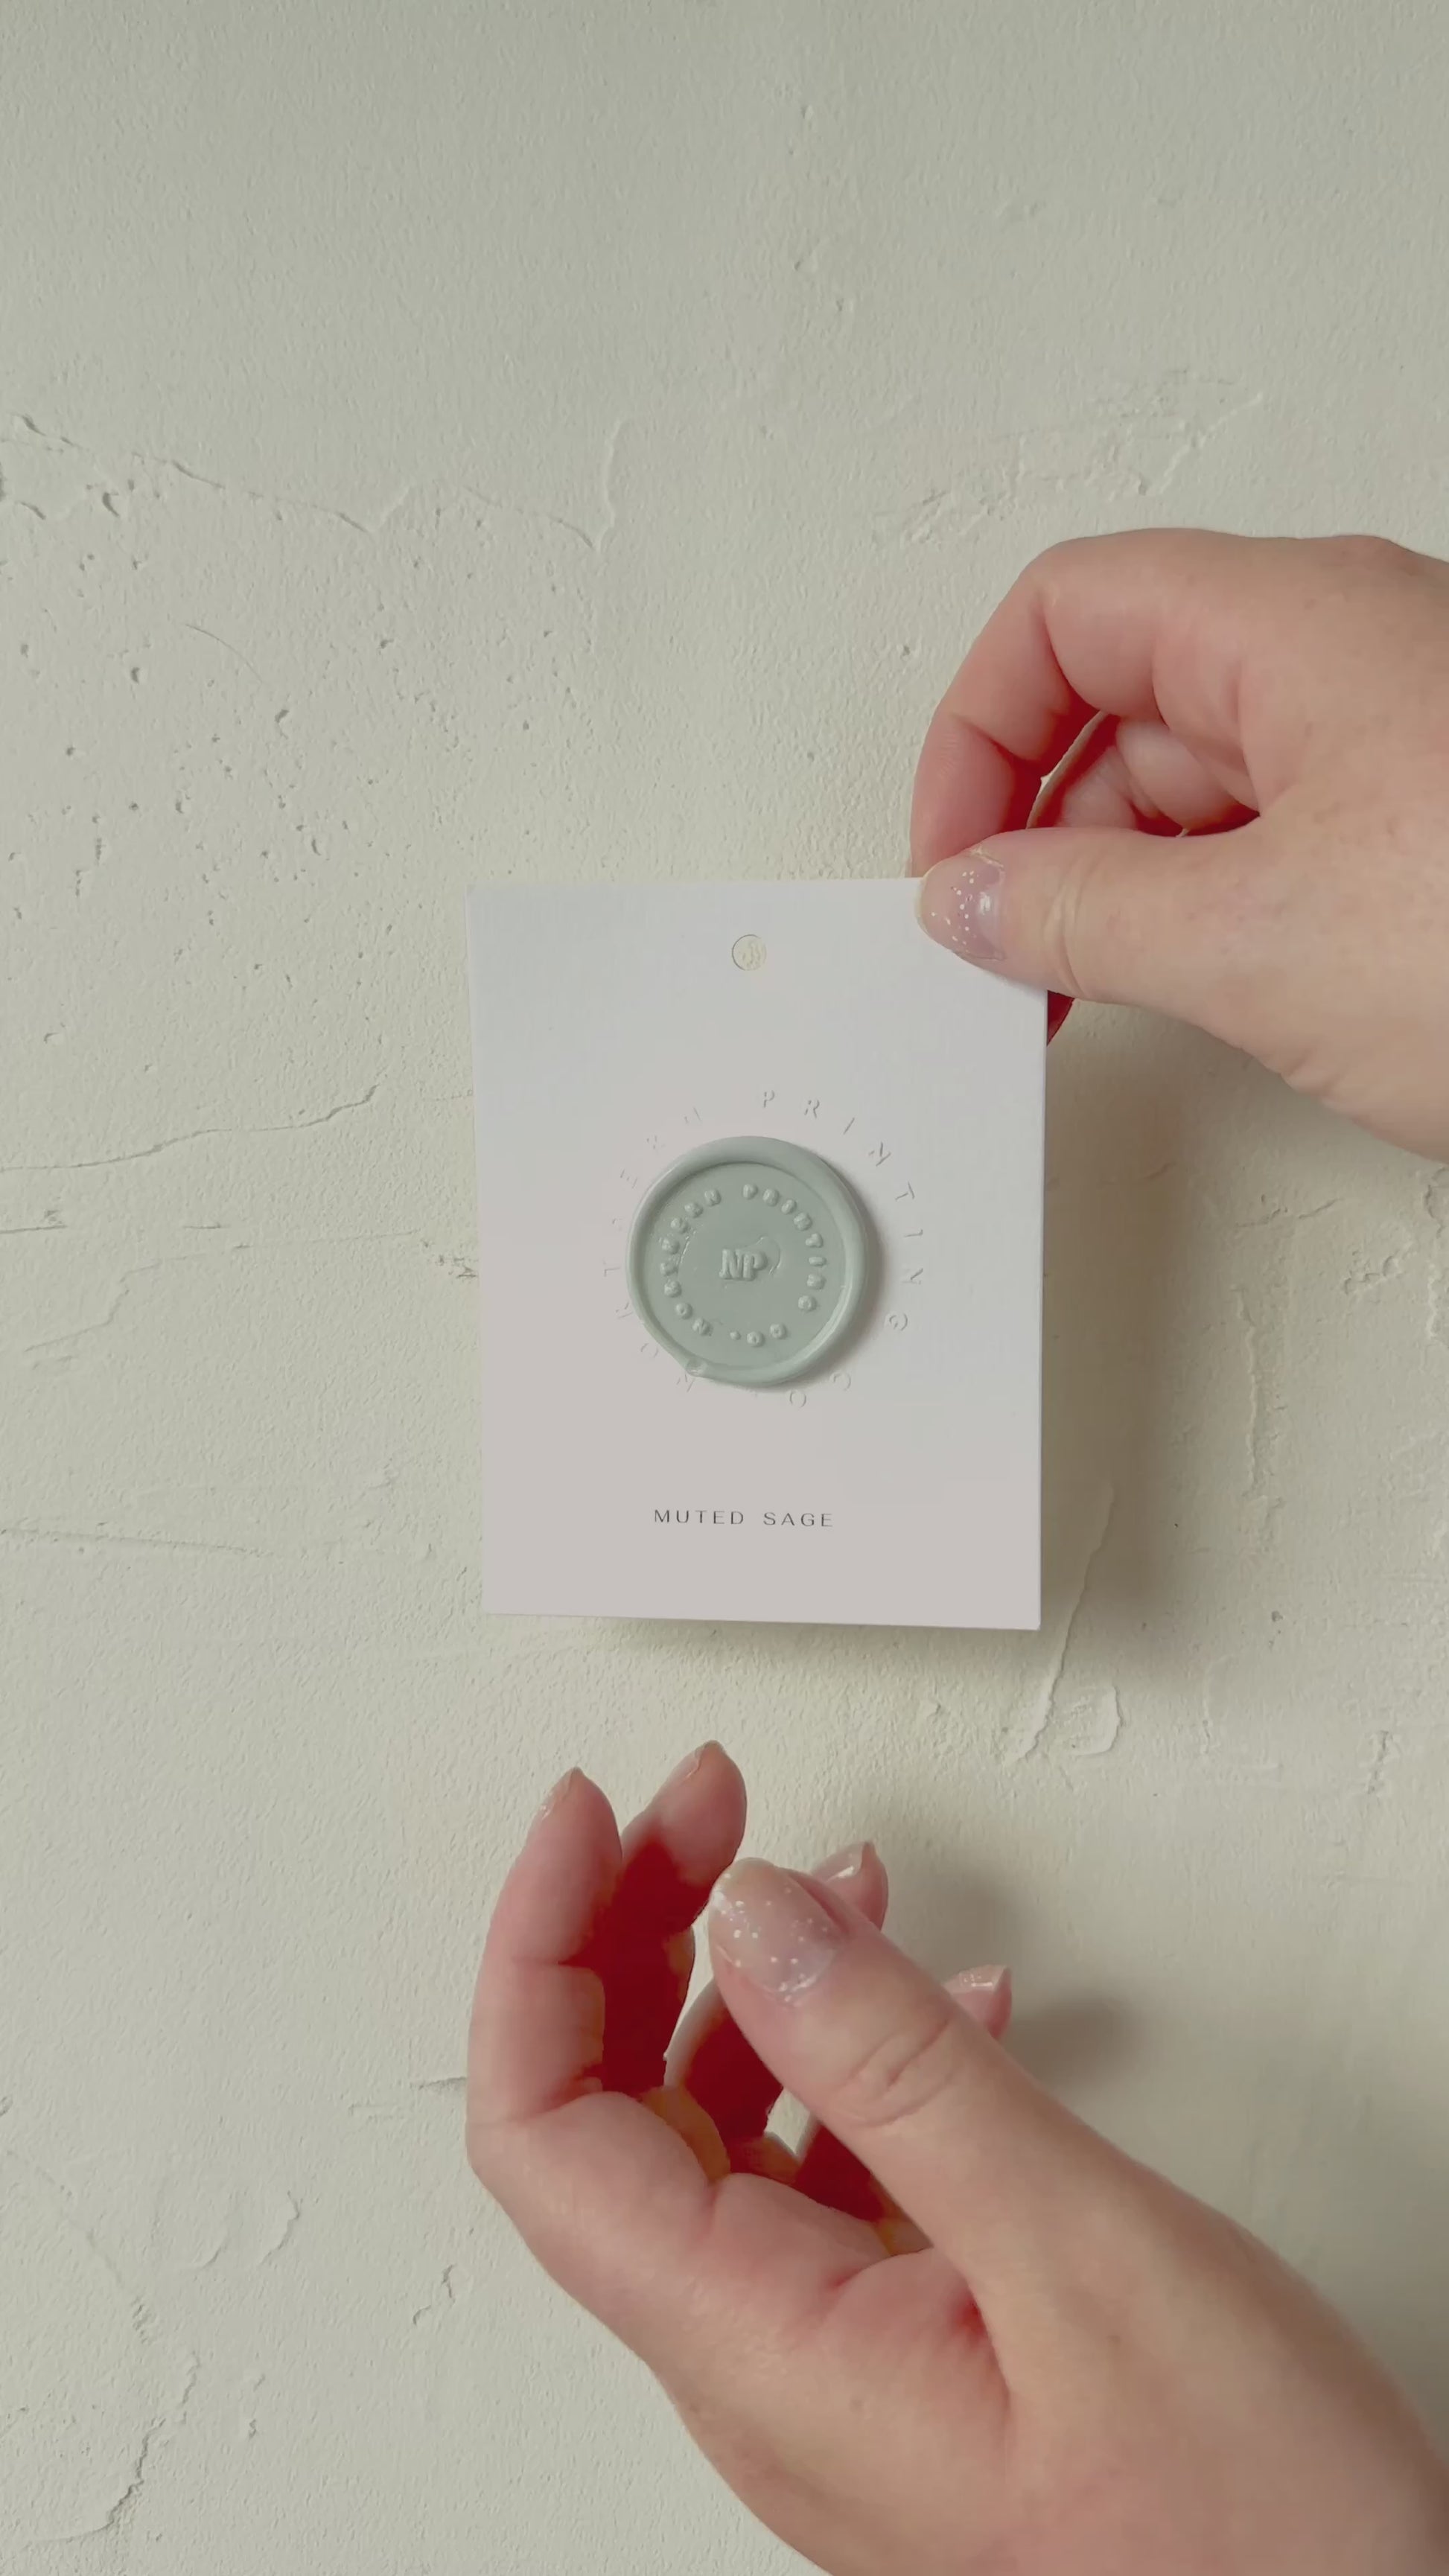 Video of Muted Sage wax seal stamp sample on textured background